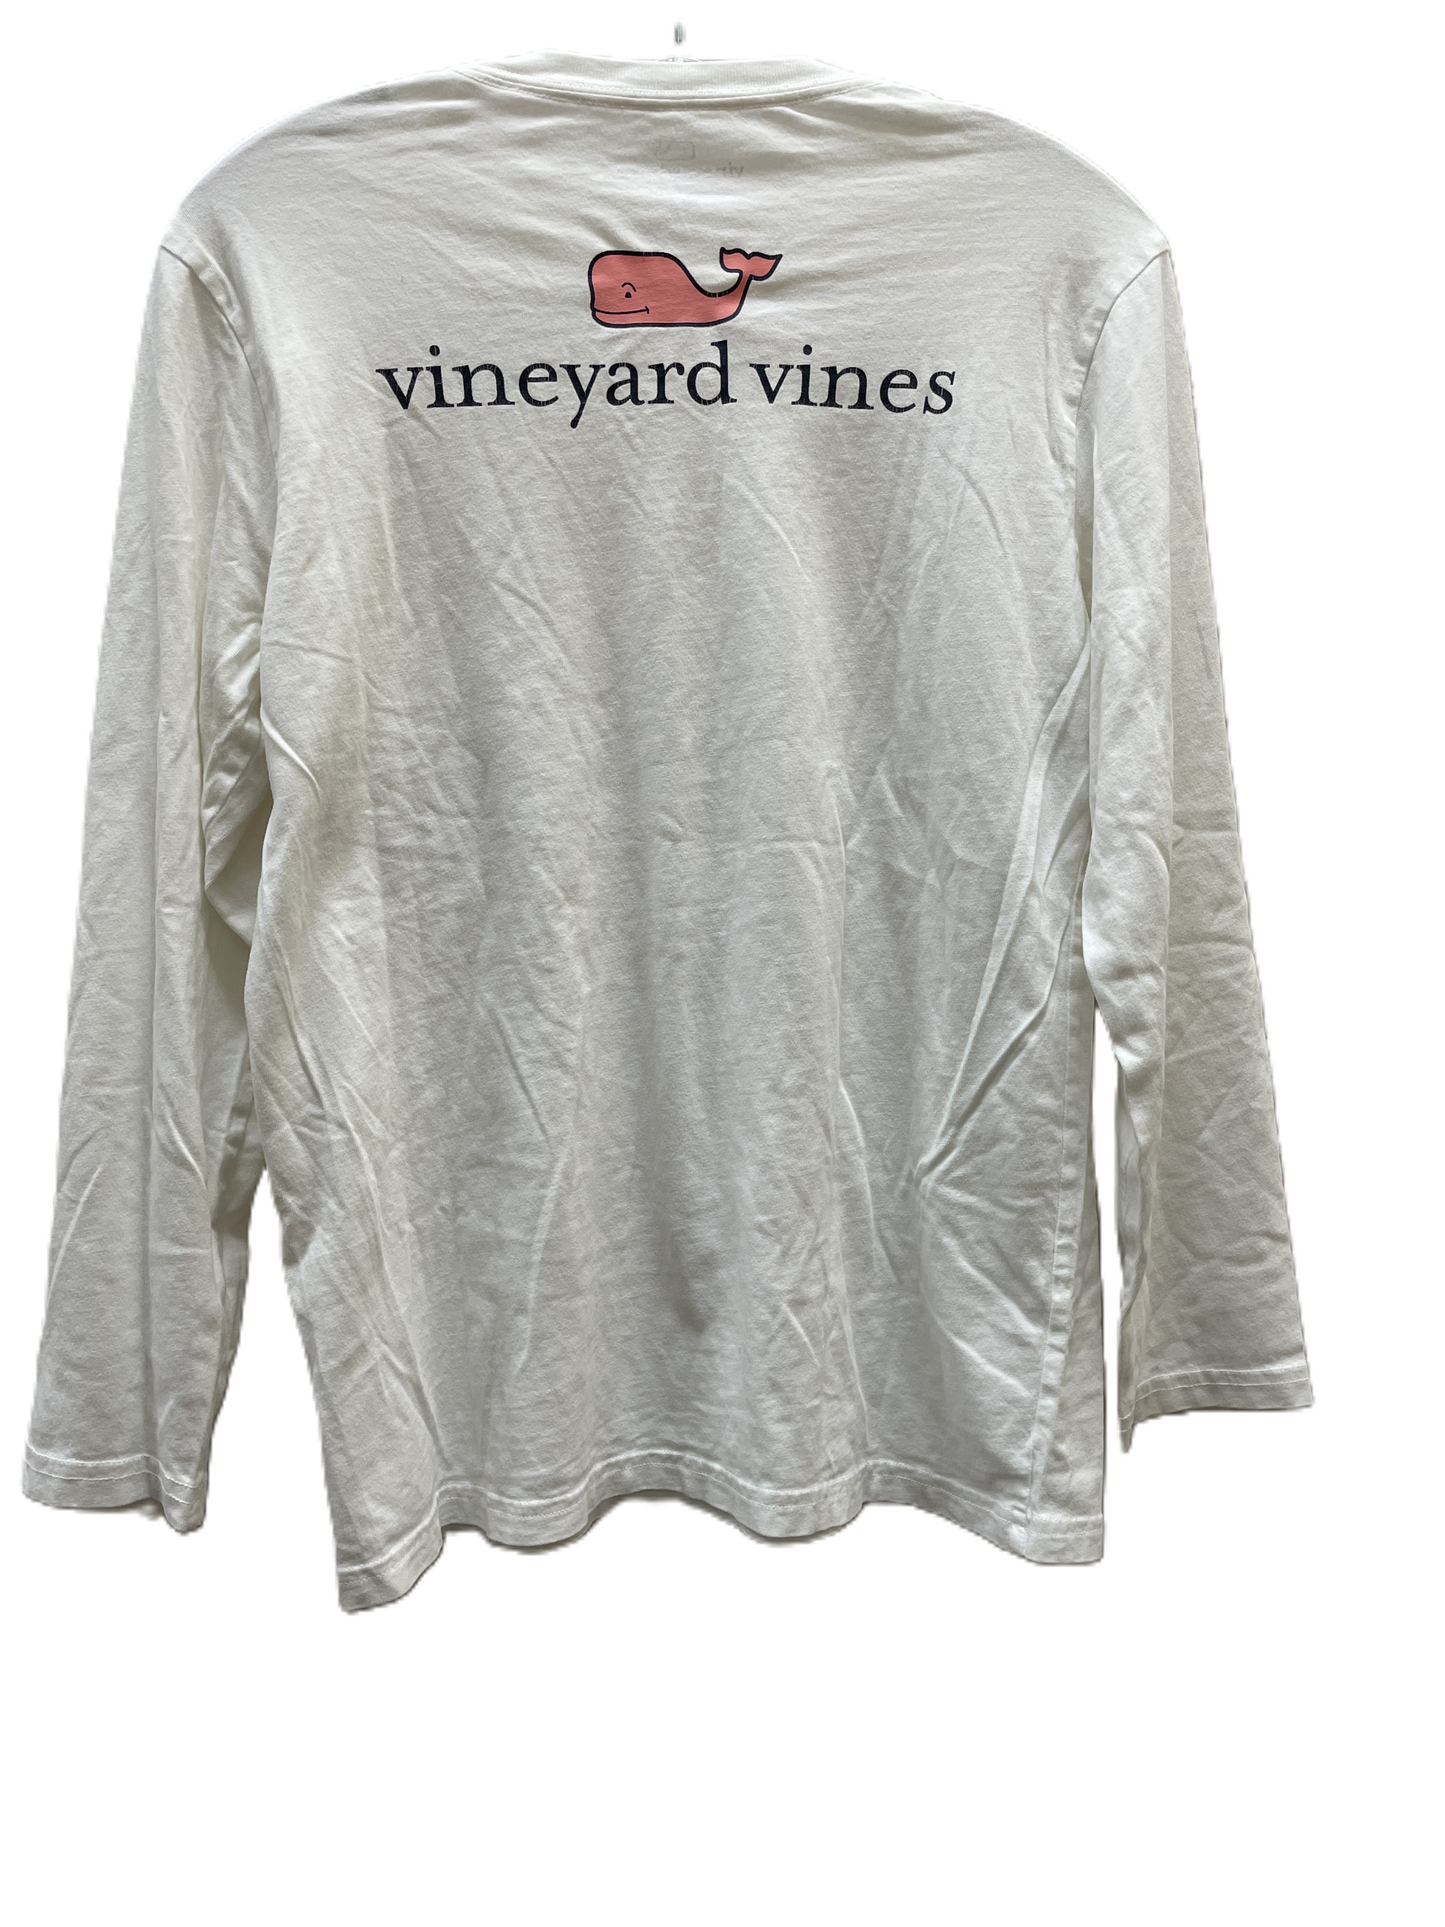 White Top Long Sleeve By Vineyard Vines, Size: L